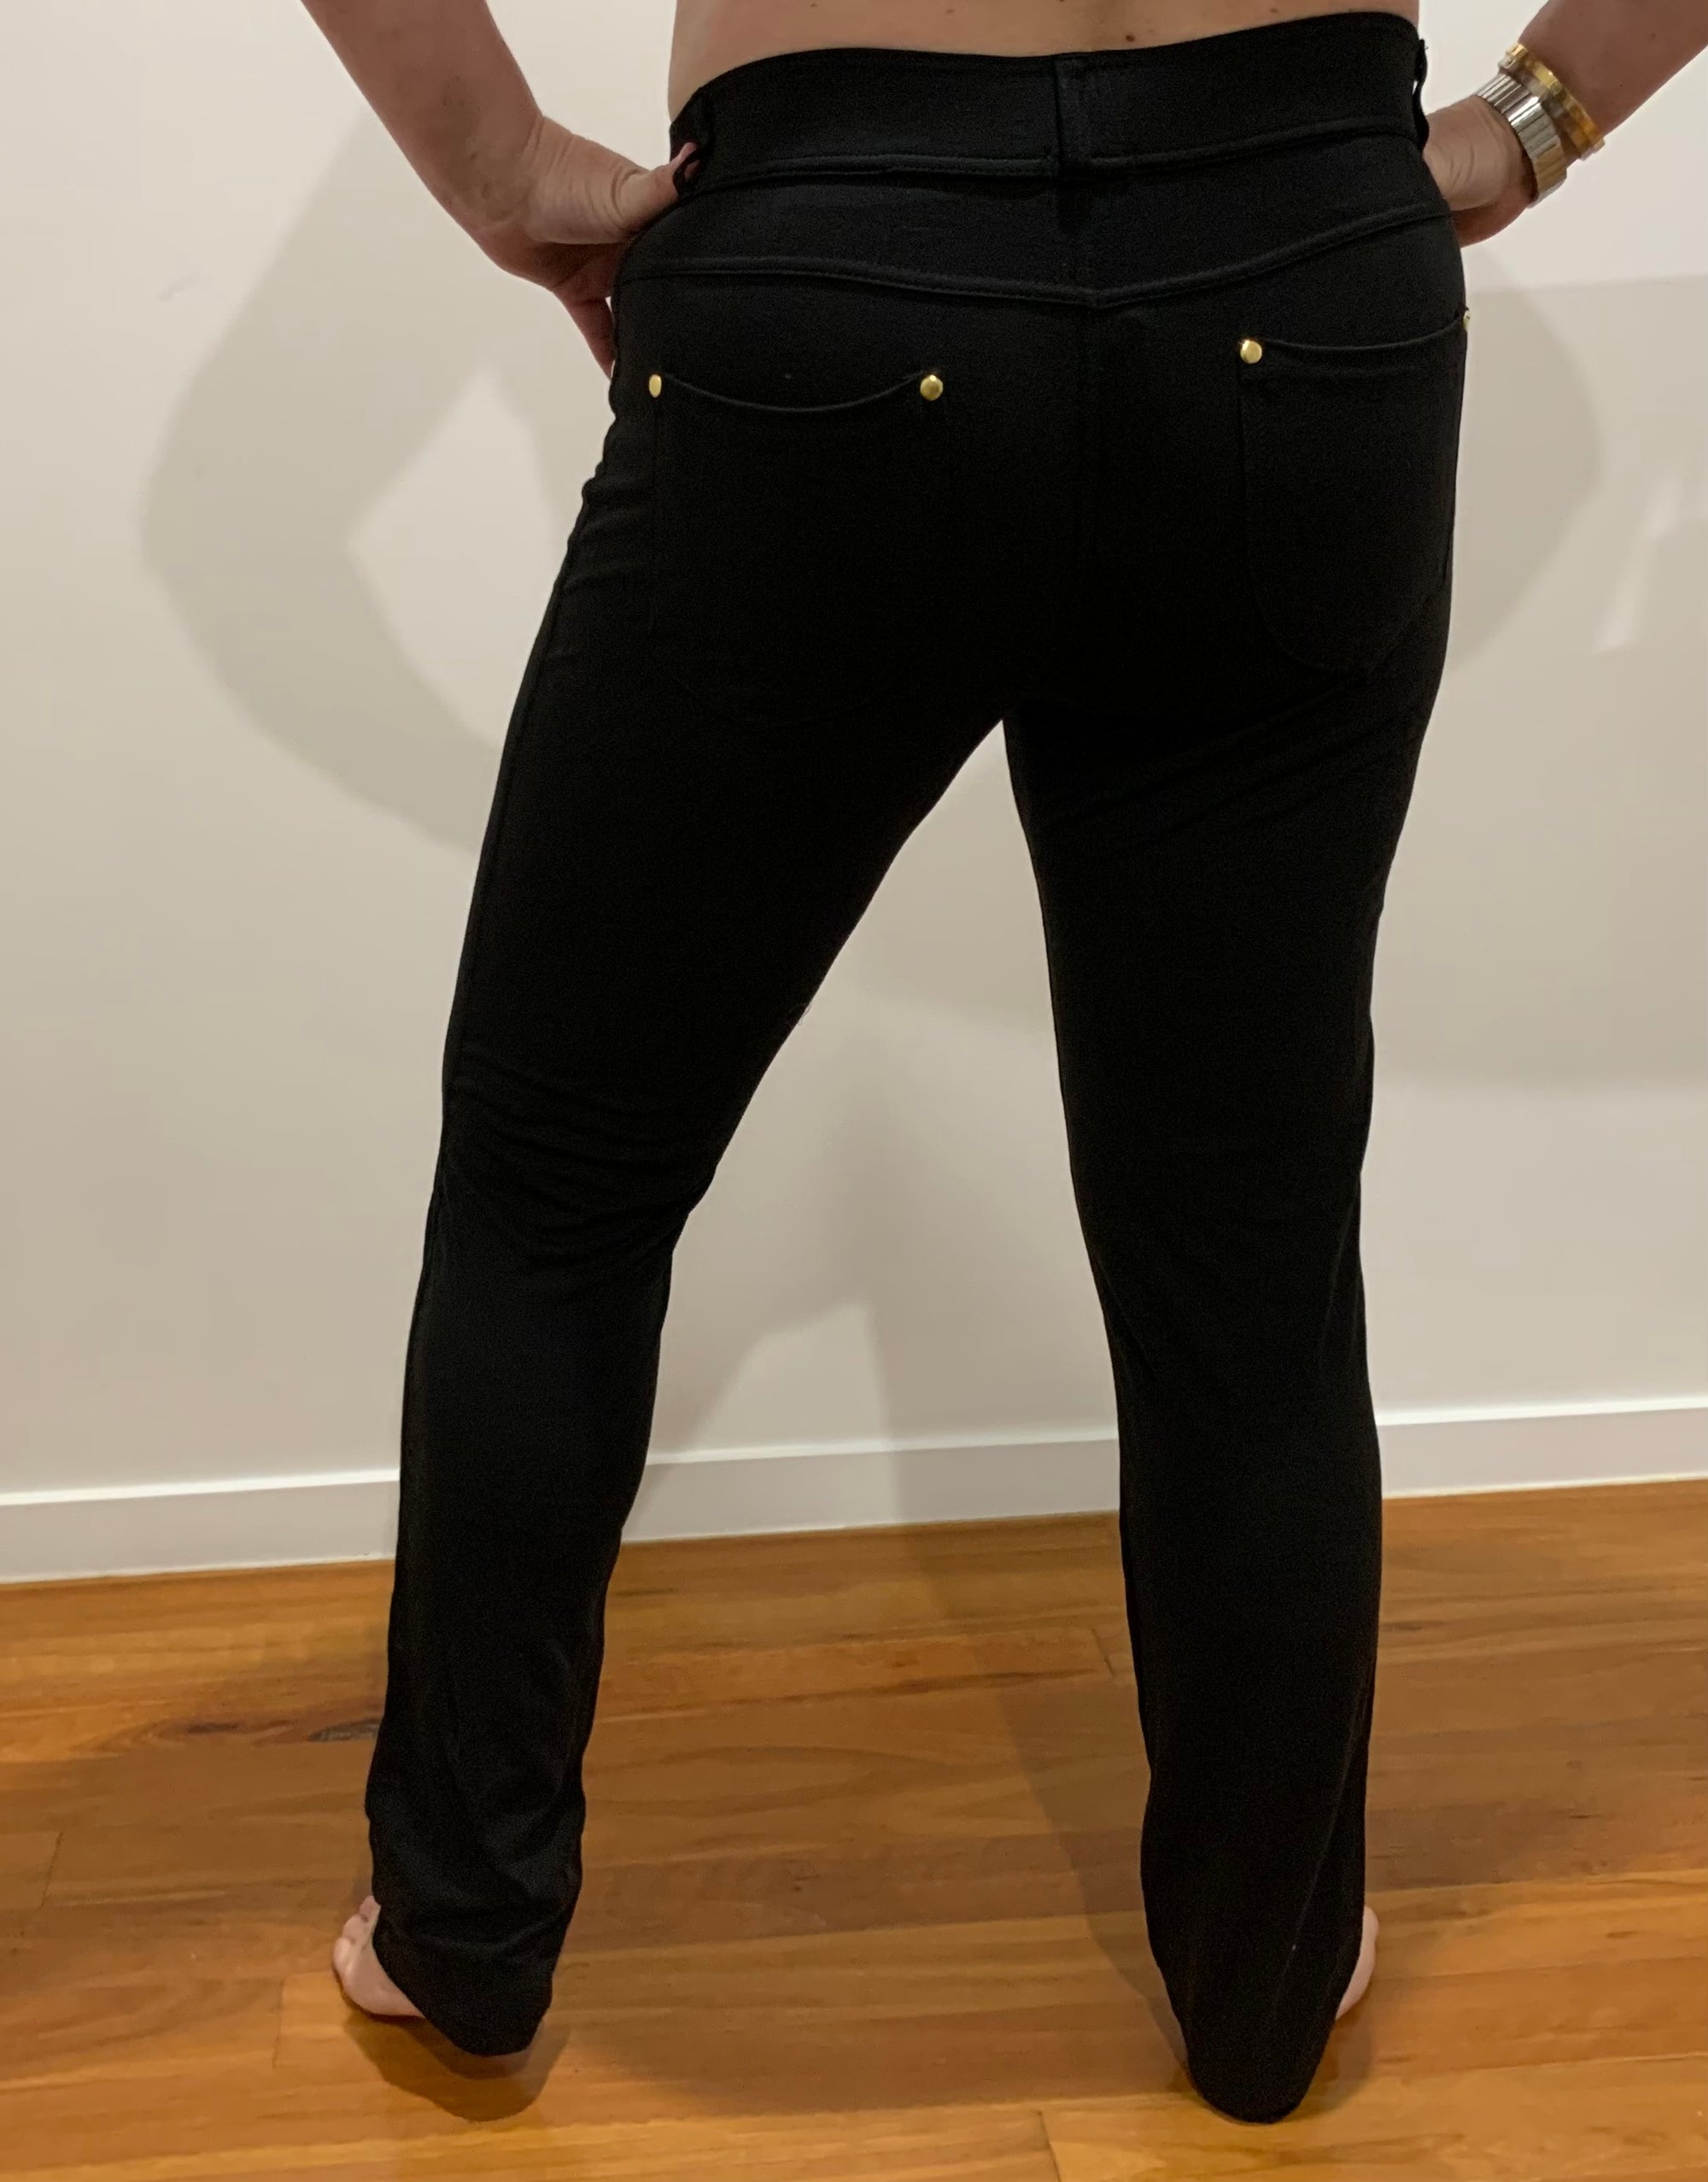 Four Way Stretch Super Comfortable Elastic Pants in Black with Gold Detail